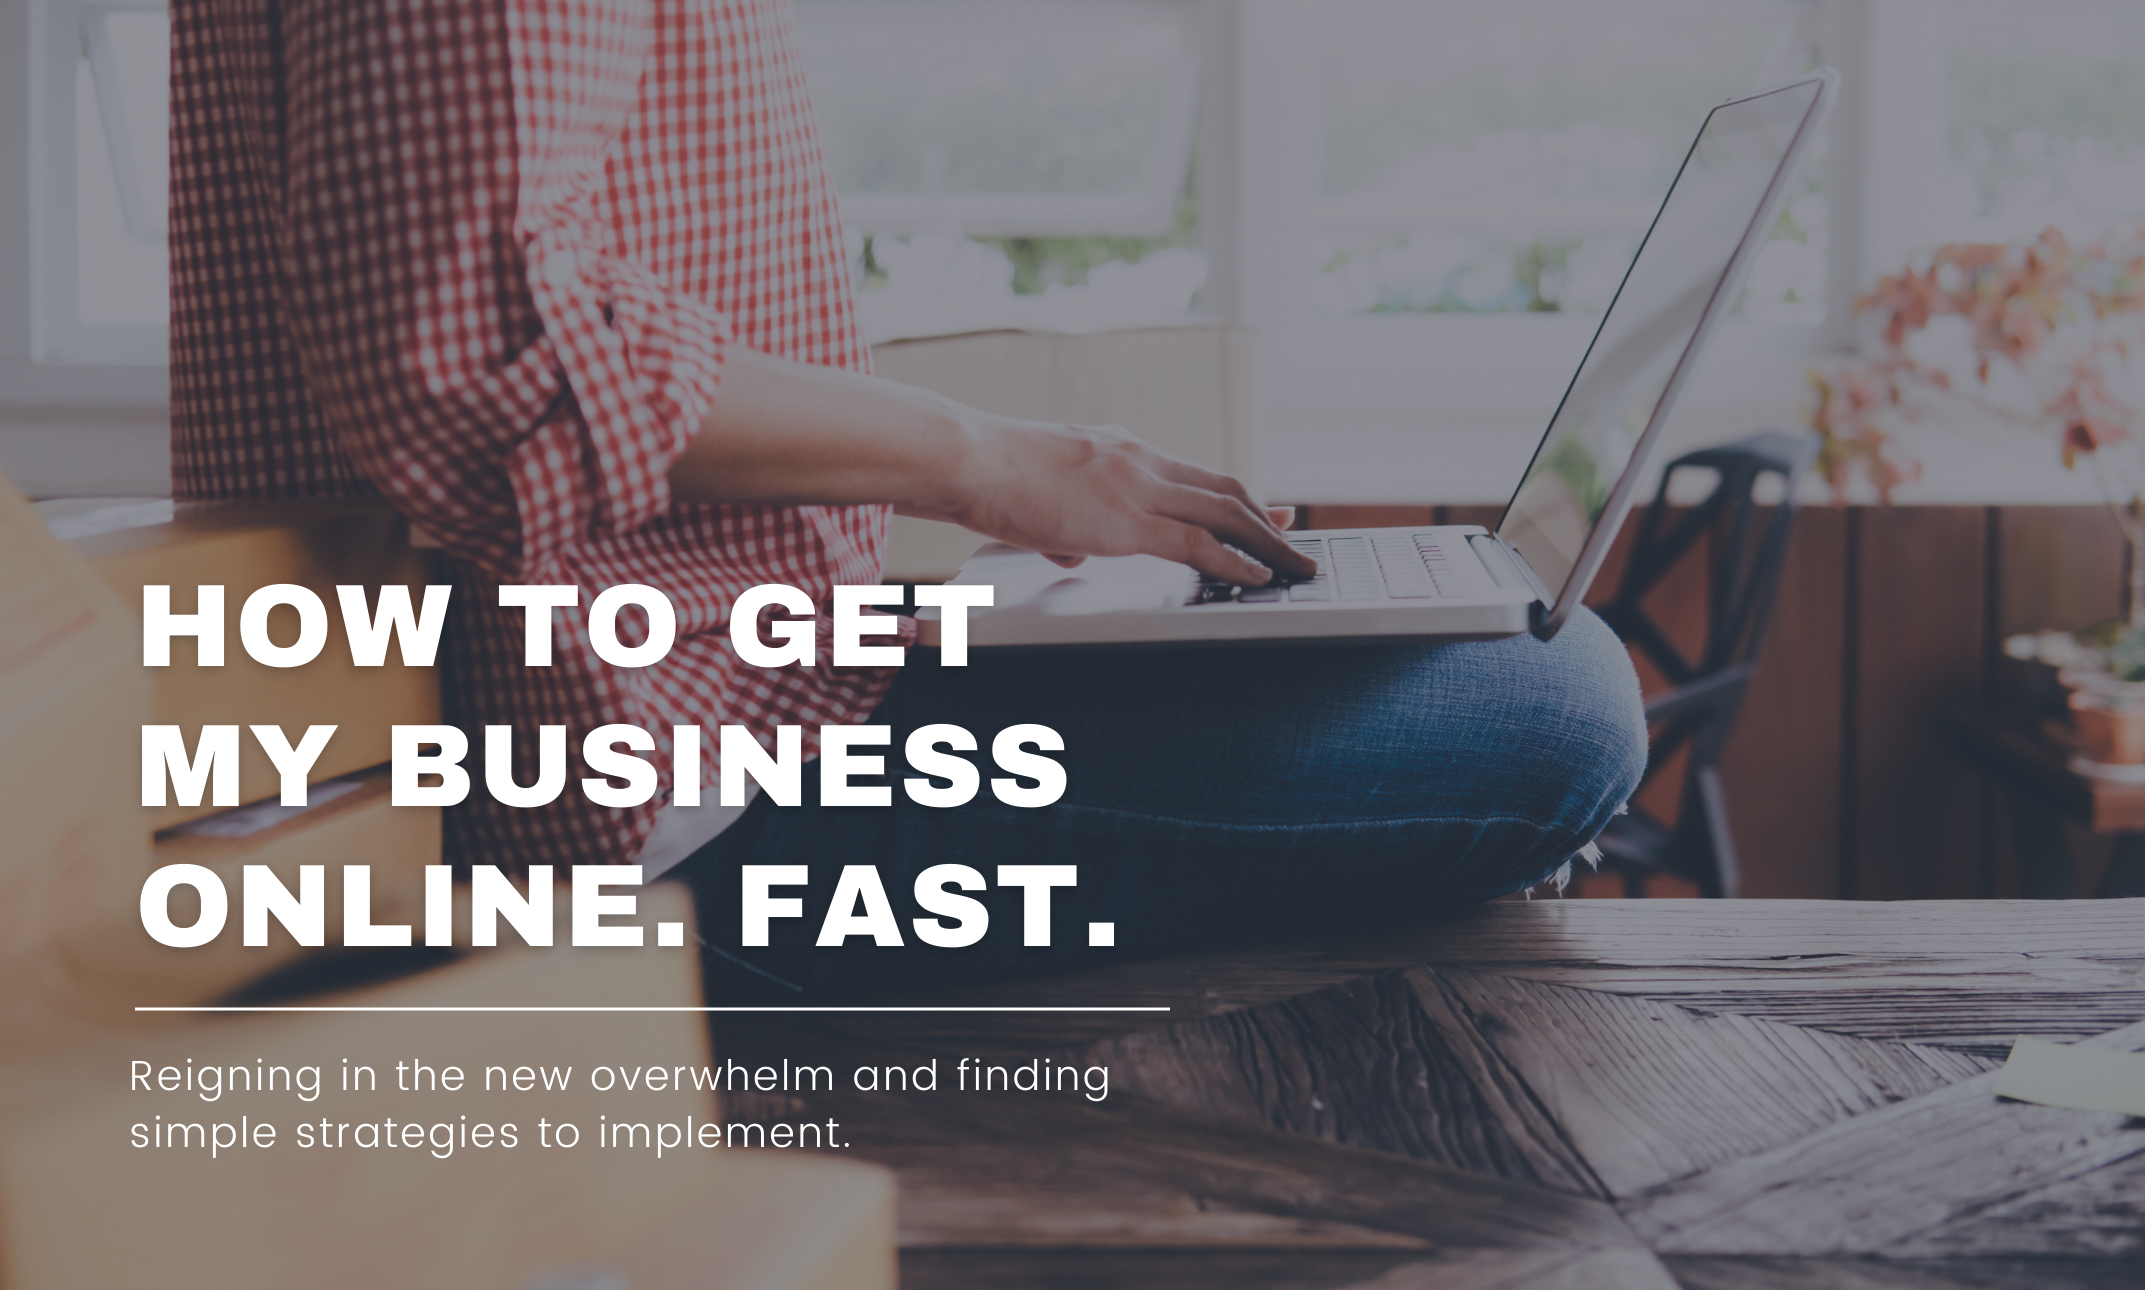 How to get my business online. Fast